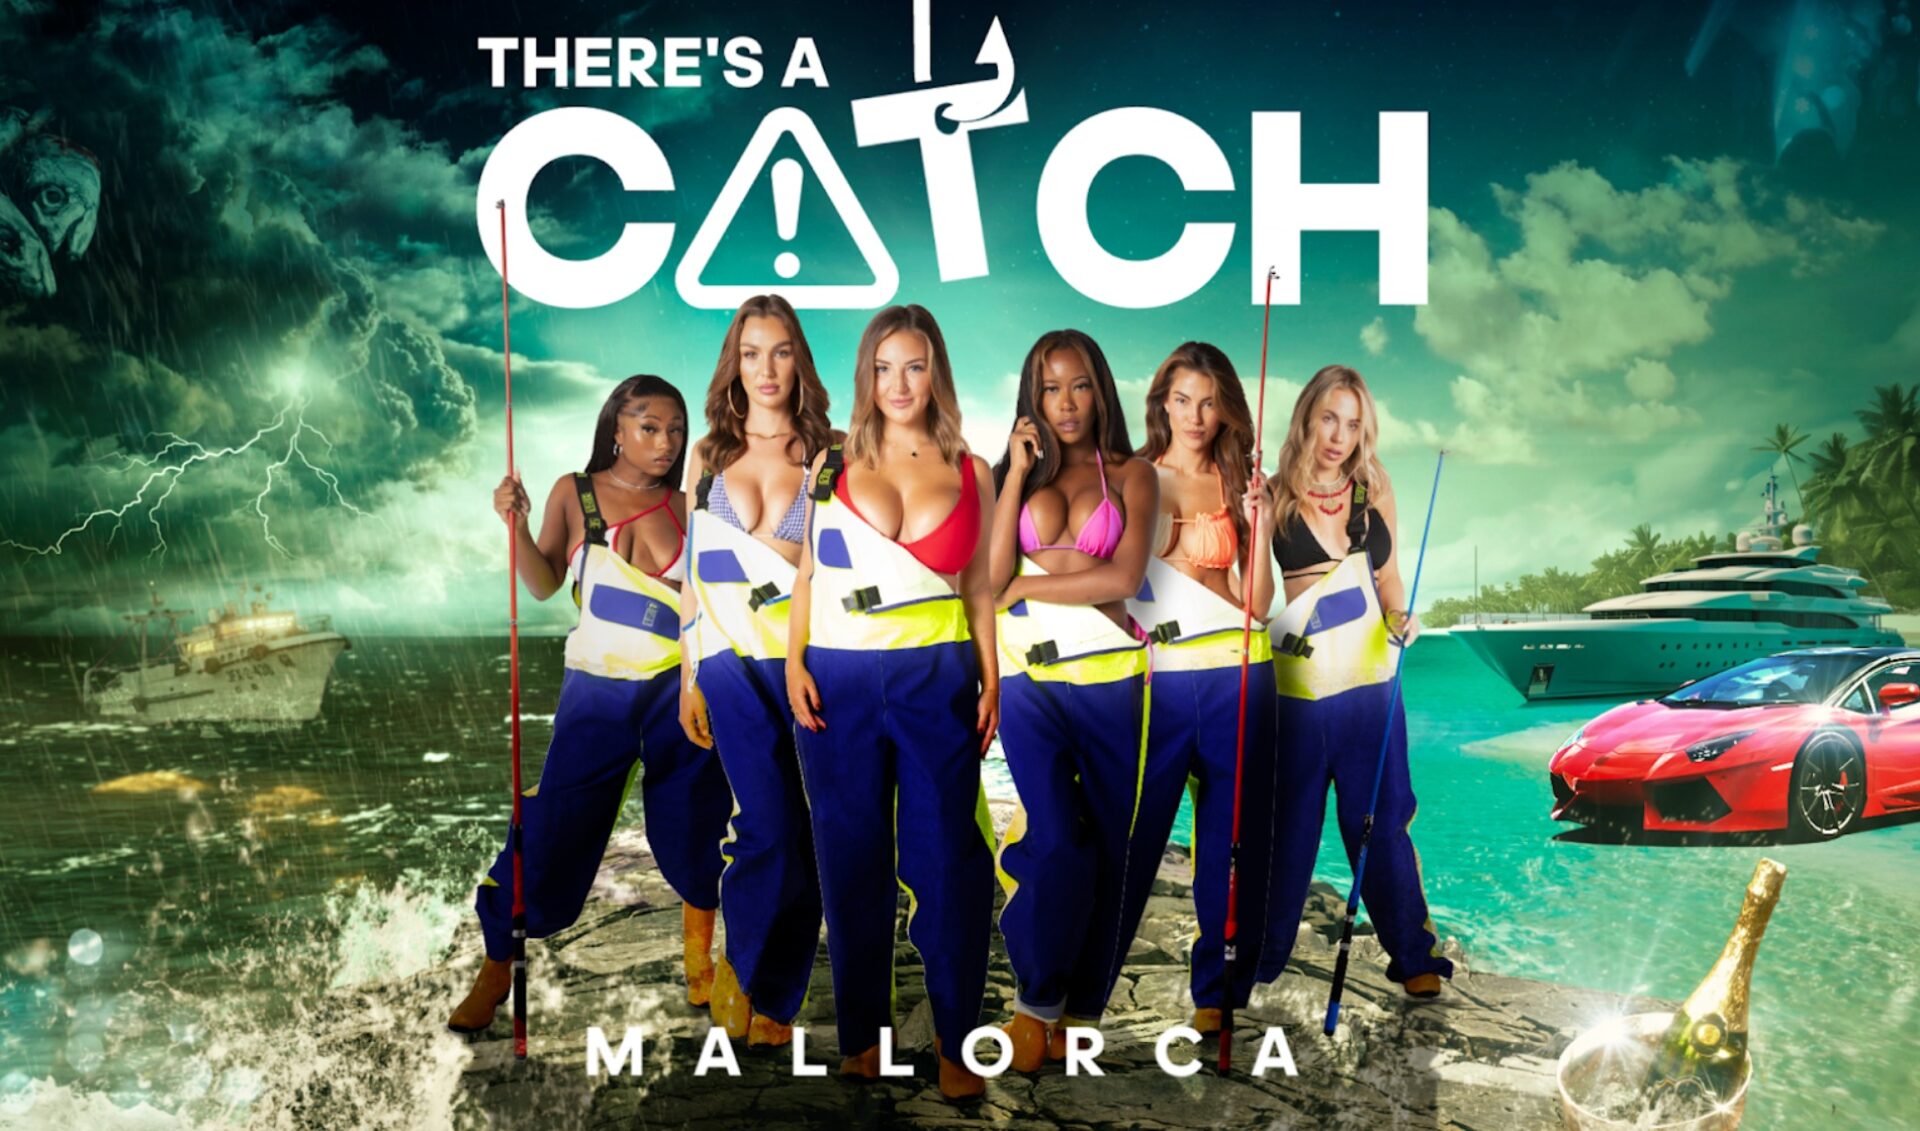 OnlyFans stars look to hook big ones in fishing series ‘There’s A Catch’